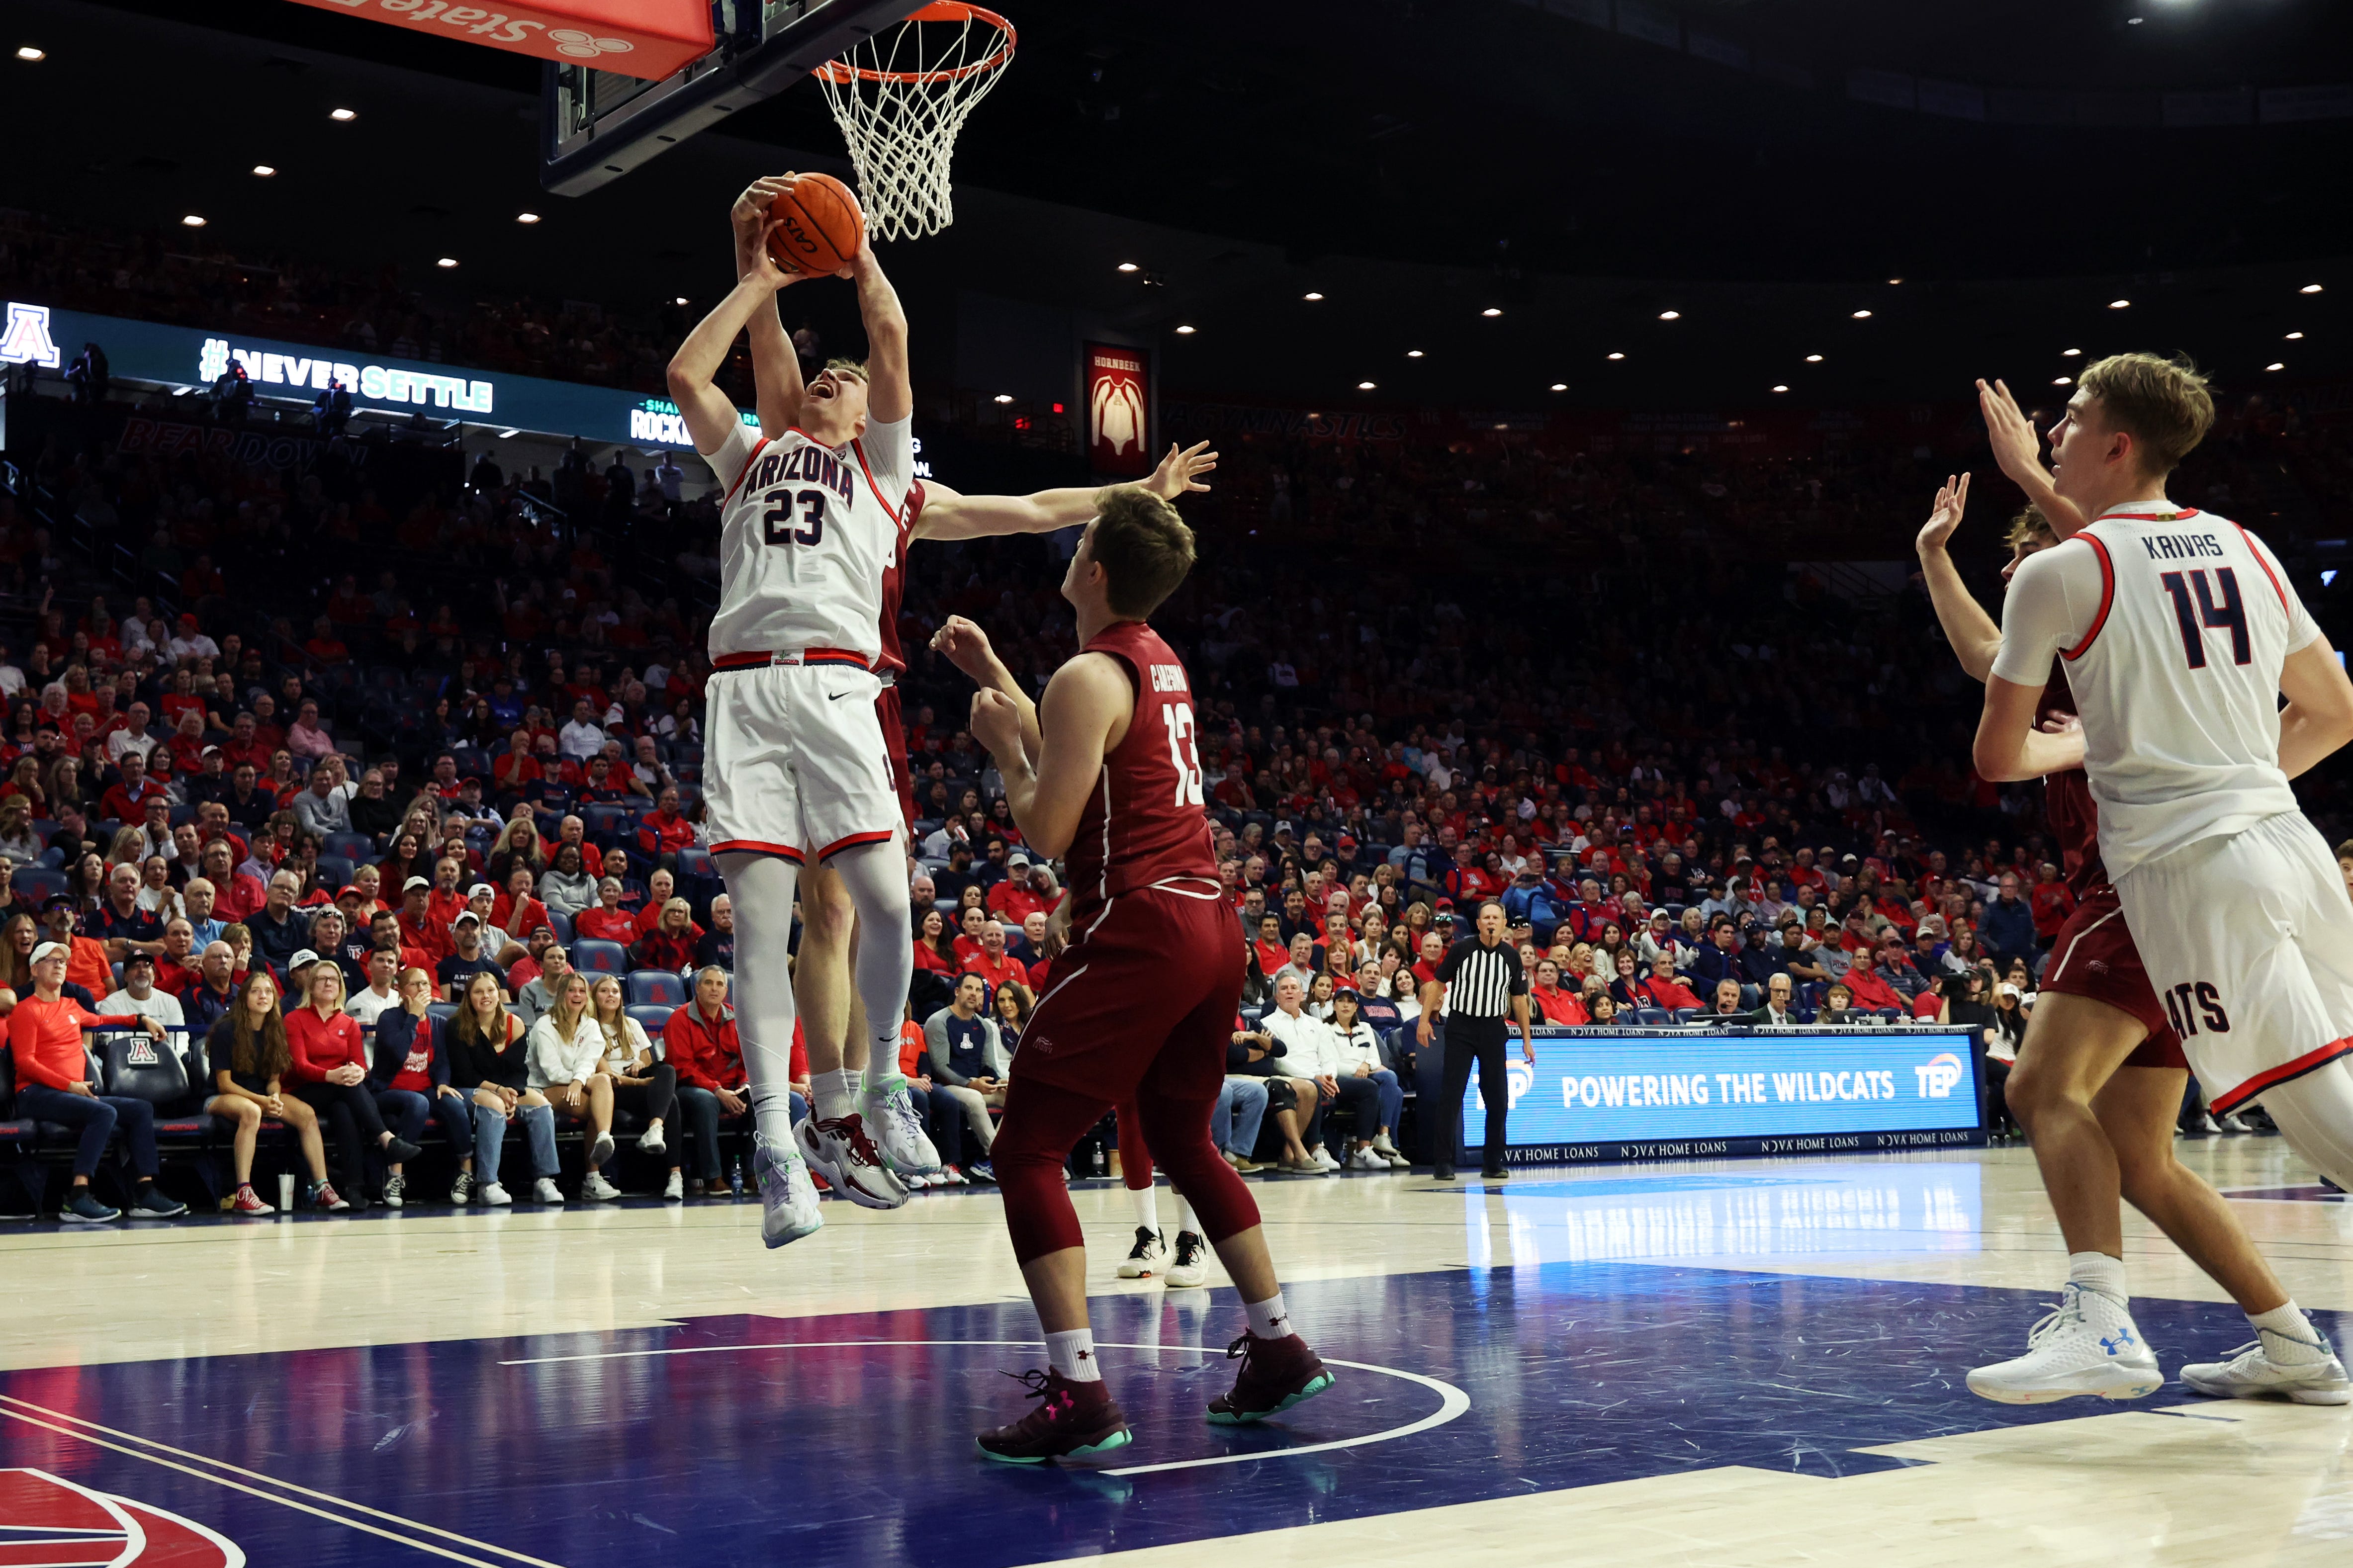 Arizona Claims Top Seed in Men’s Tournament